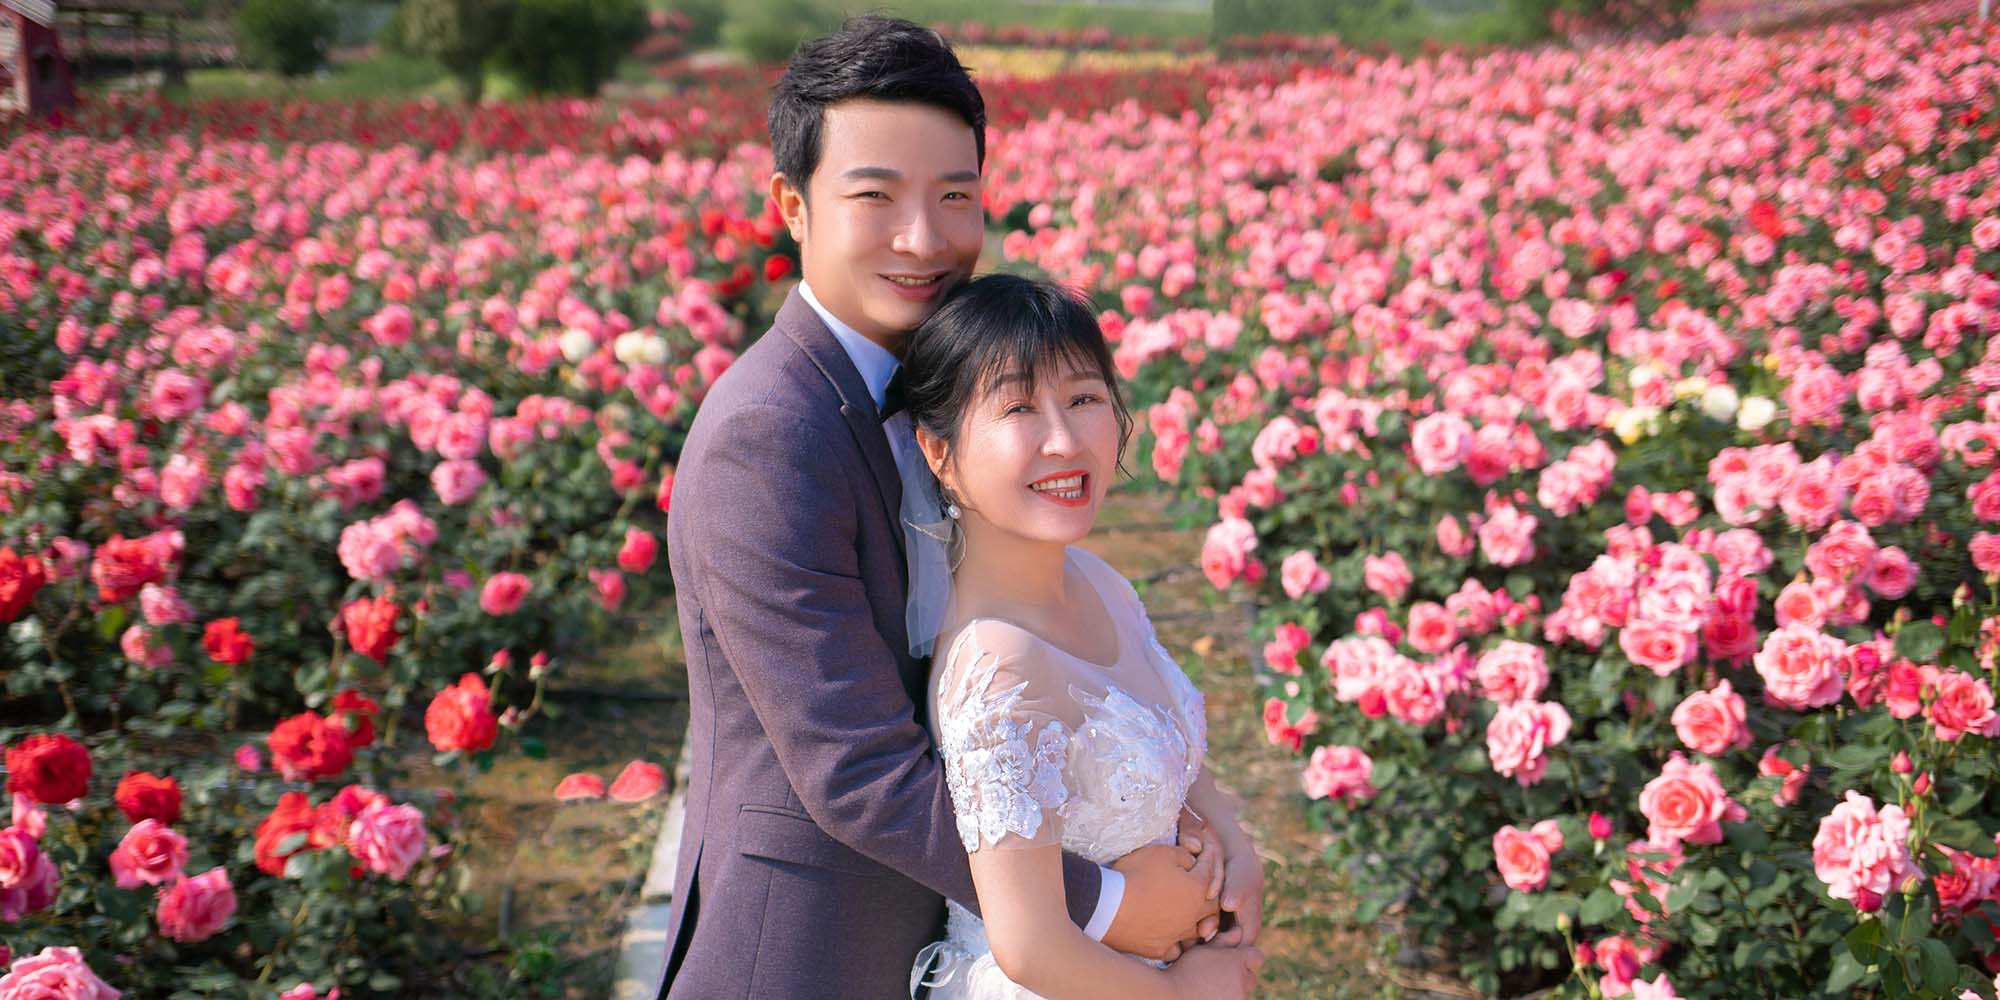 Disabled Chinese poet’s wedding plan sparks cheers and boos